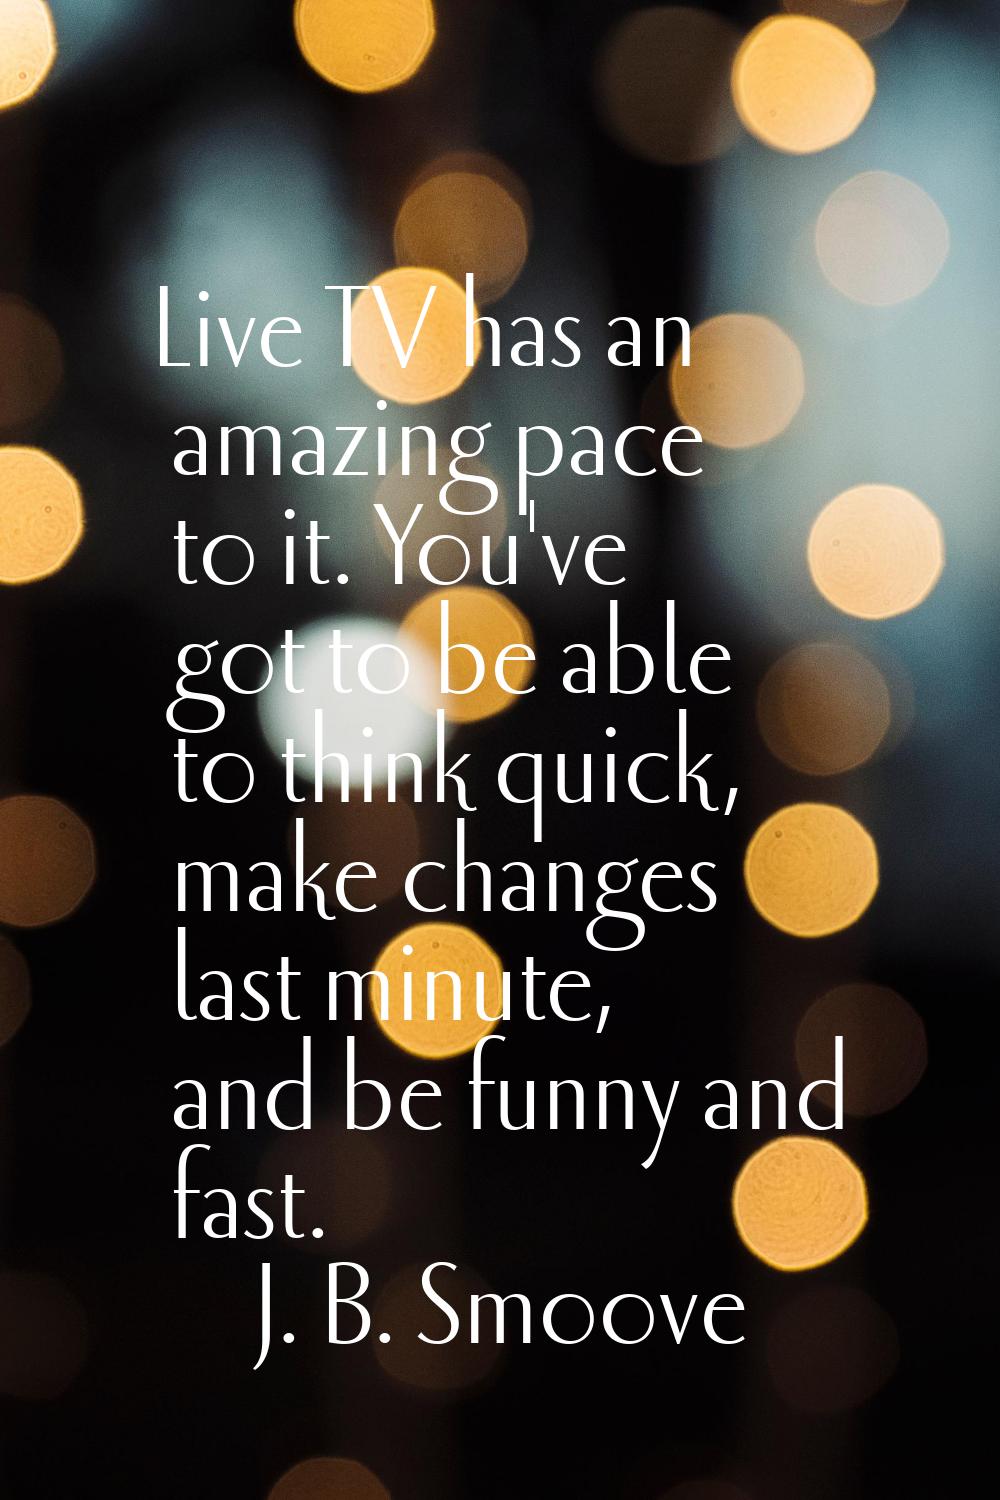 Live TV has an amazing pace to it. You've got to be able to think quick, make changes last minute, 